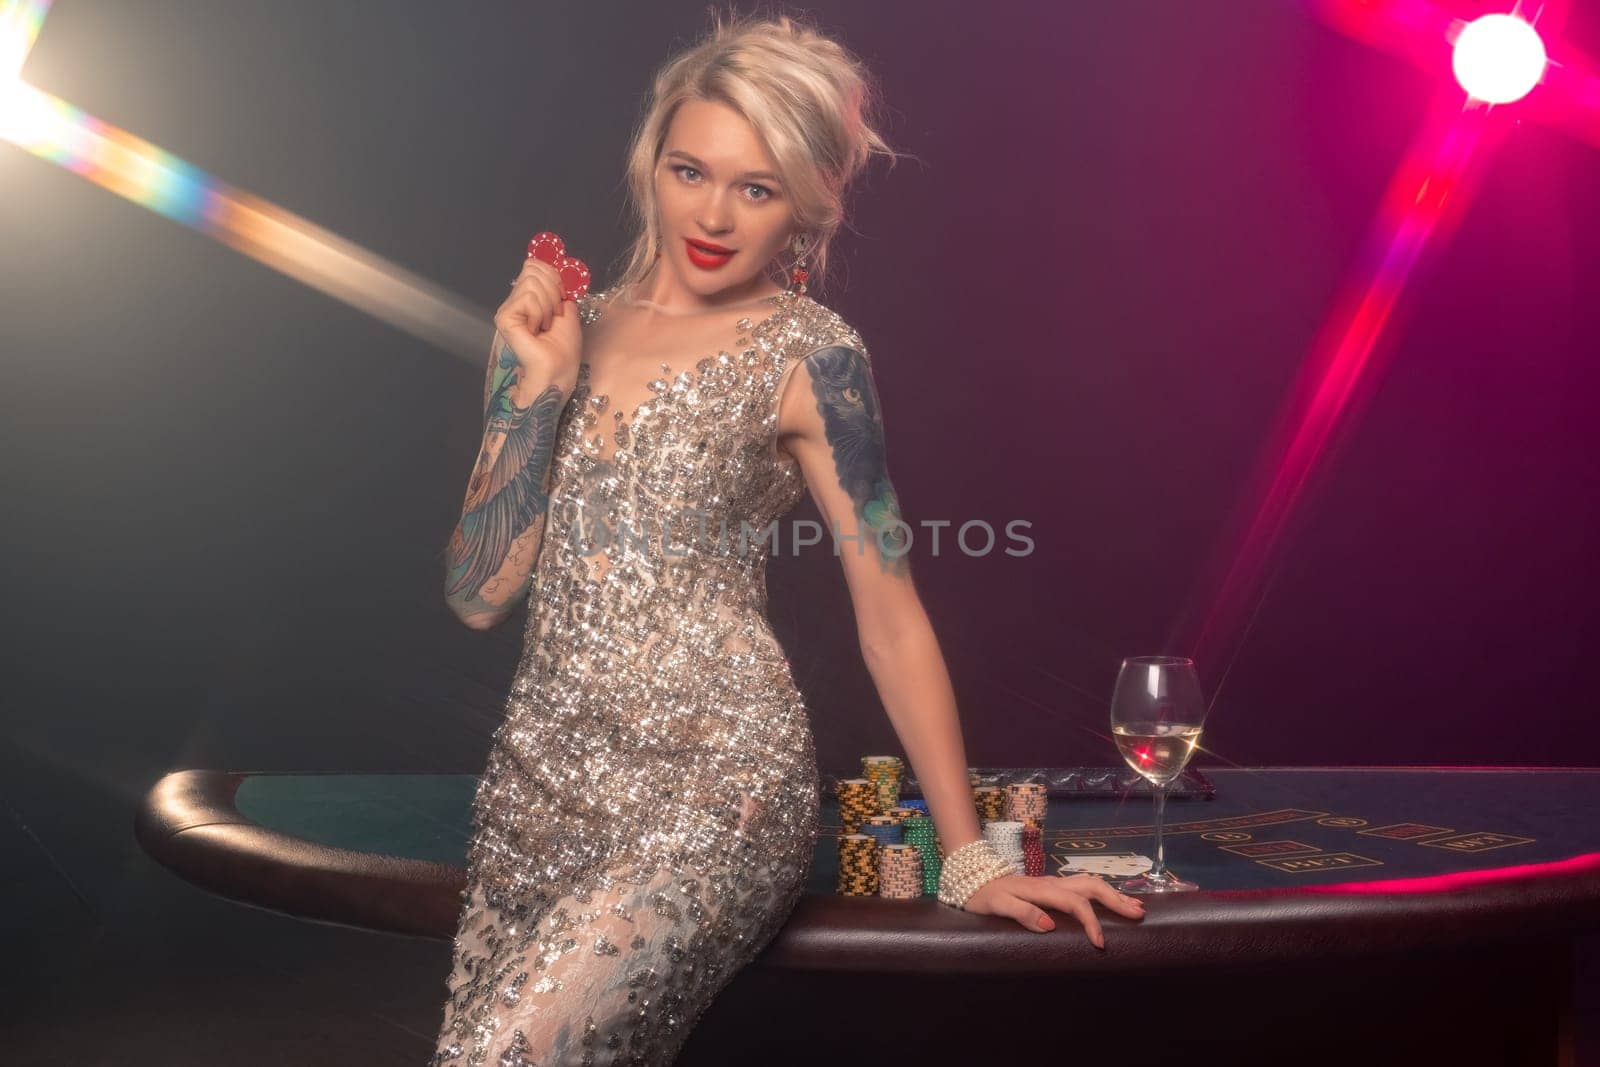 Medium close-up shot of a charming lady with blond hair, tattoed hands and perfect make-up, dressed in a silver shiny dress. She is standing sideways against a gambling table, with red chips in her hands and smiling. Poker concept on a black smoke background with pink and blue backlights. Casino.